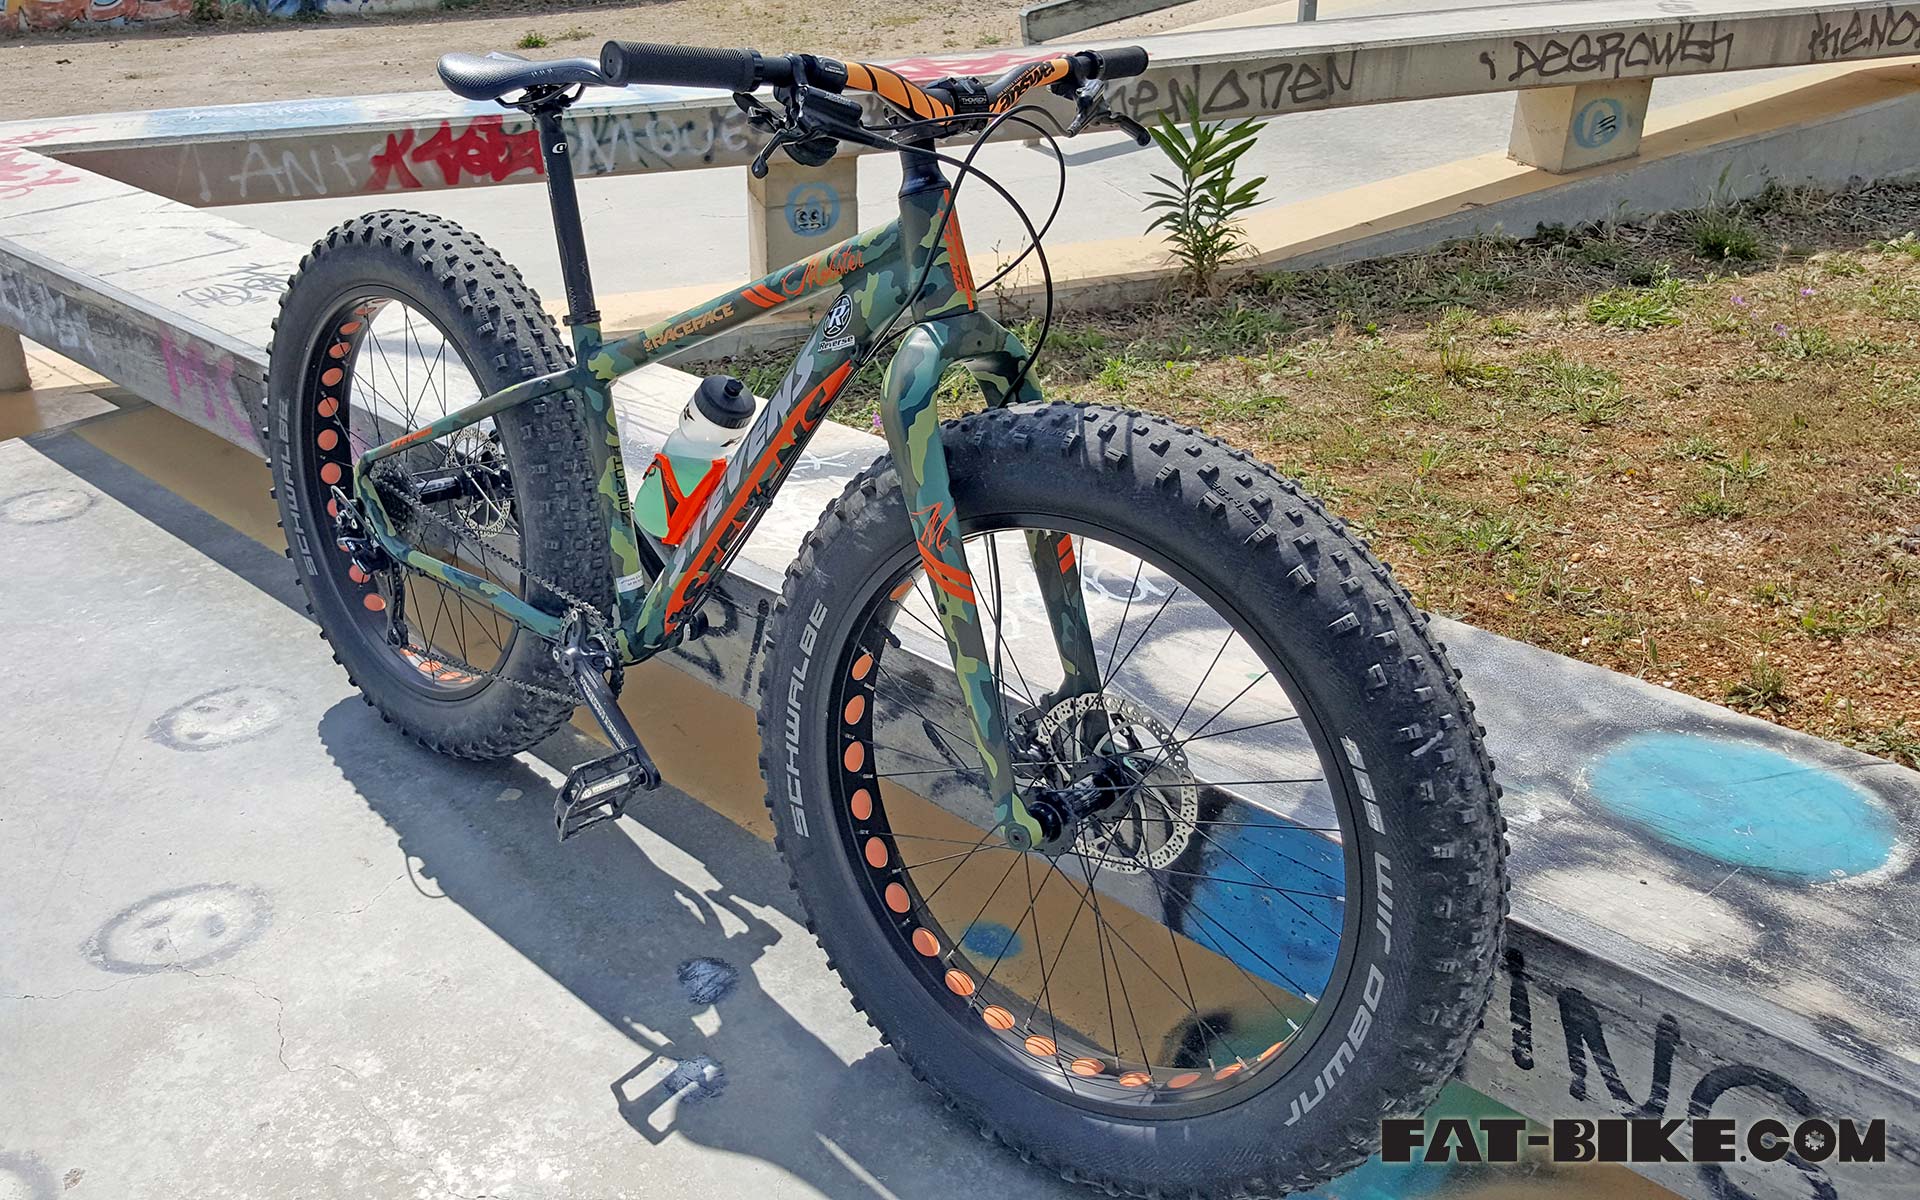 Franck Sent In This Photo Of His Stevens Mobster Fat Bike From A Skate